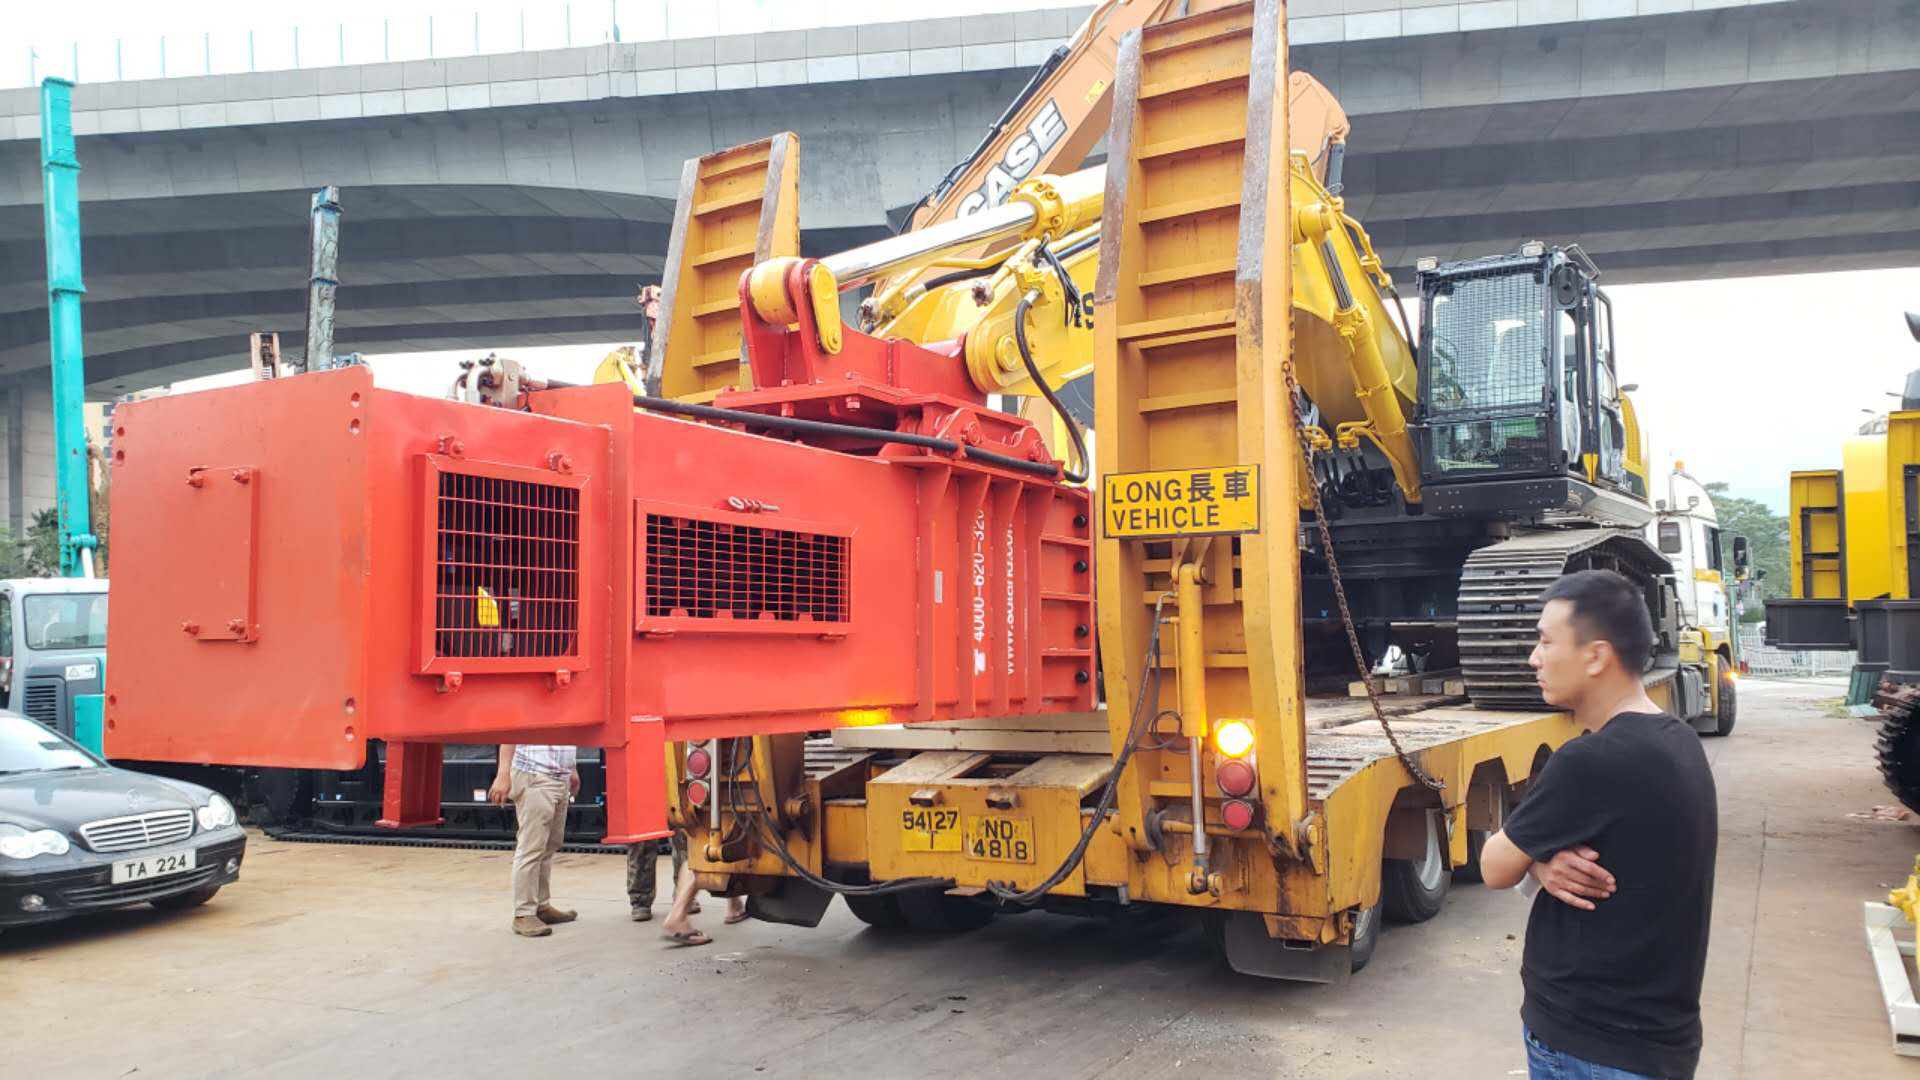 Rapid impact compactor on a transporter